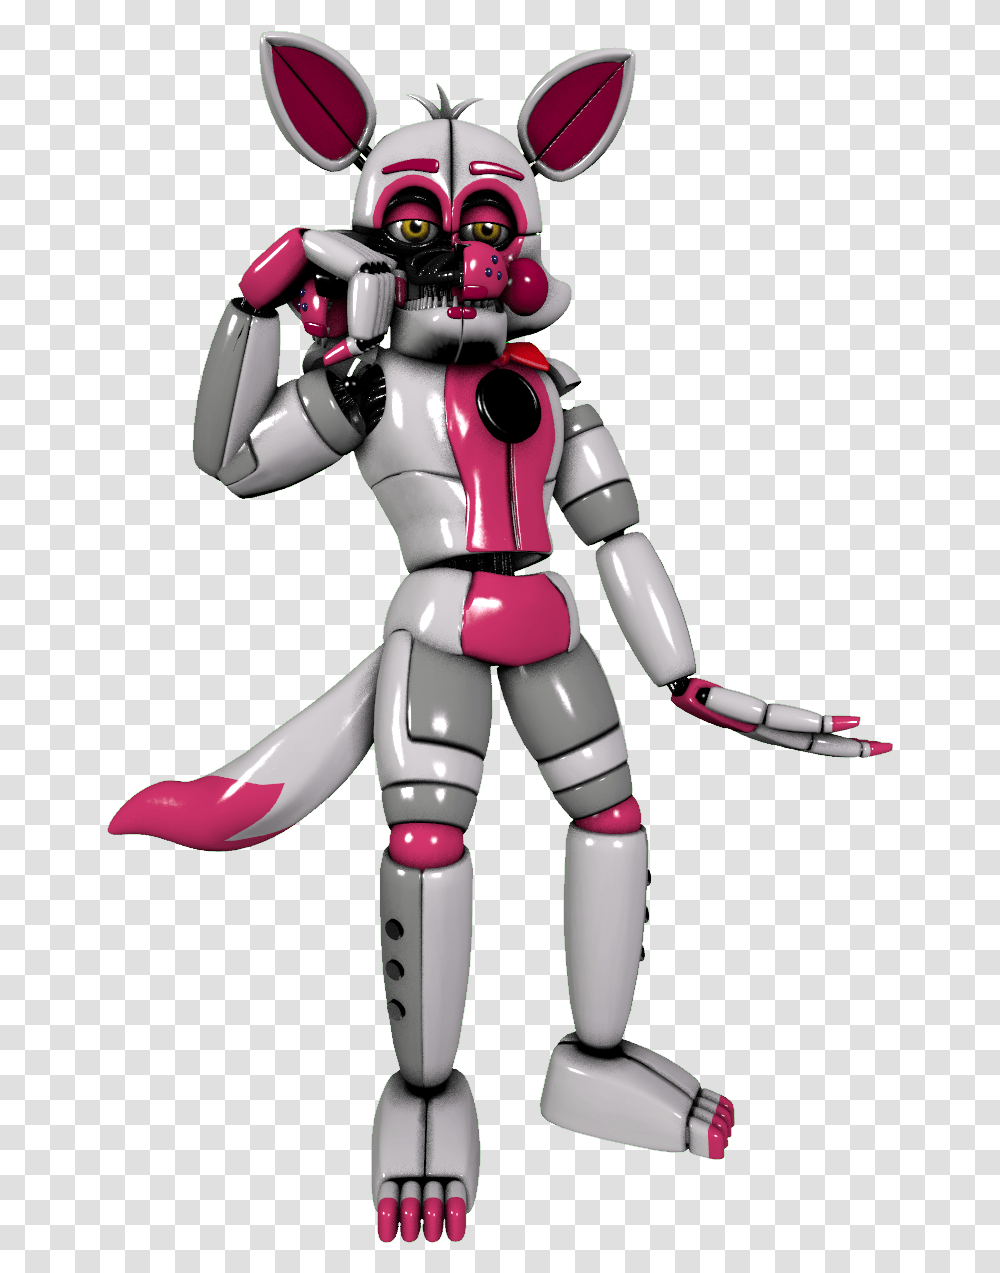 Funtime Foxy Sfm Wikia Profile Fnaf Funtime Foxy Full Body, Toy, Robot Transparent Png